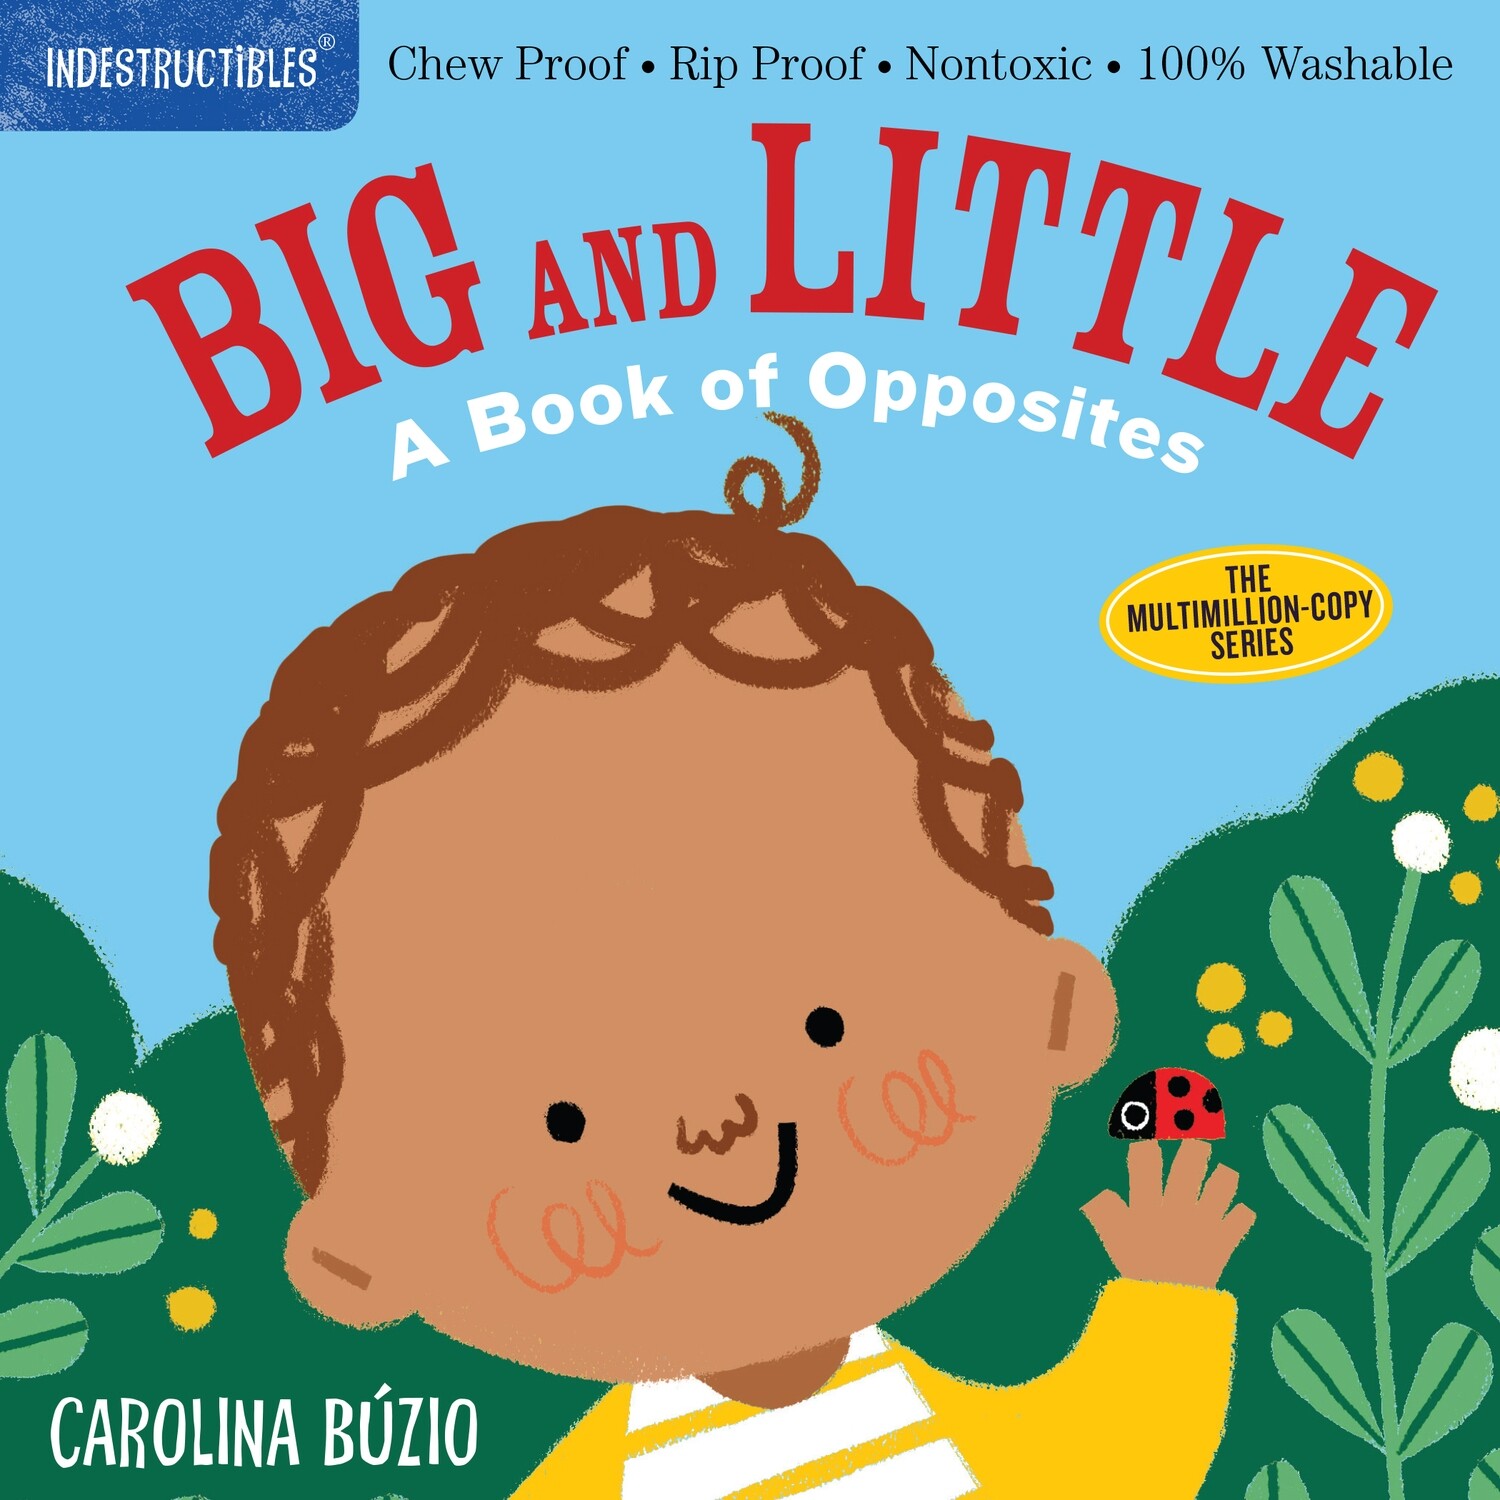 Indestructibles Book "Big and Little"